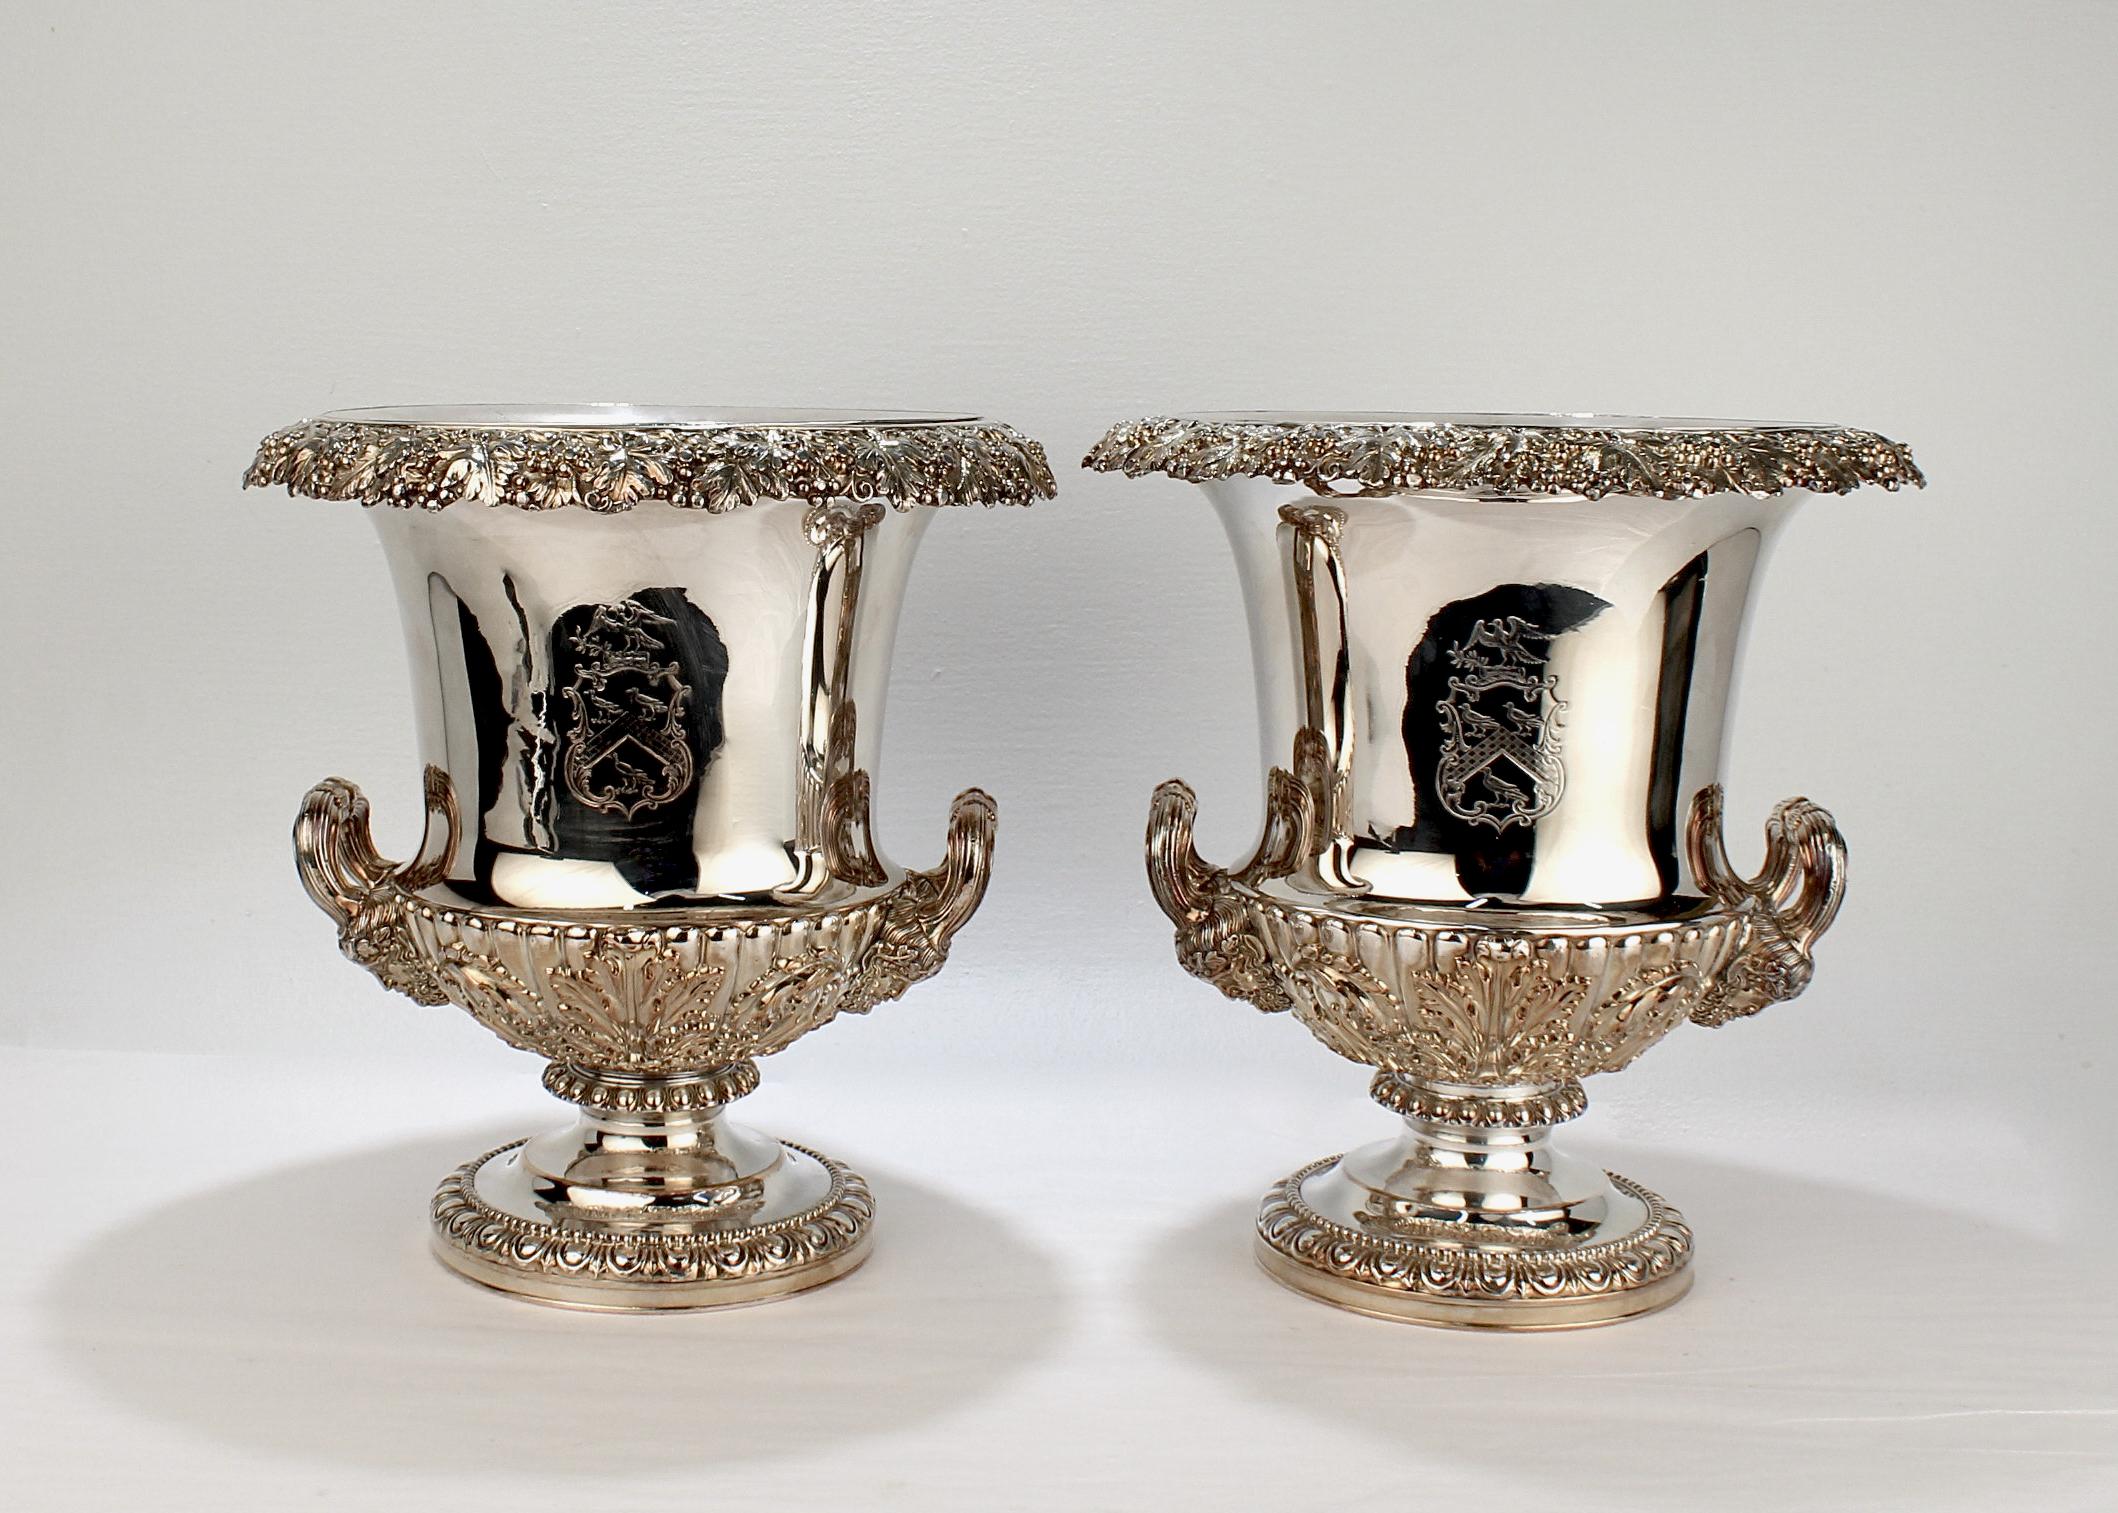 A very fine pair of crested Georgian Sheffield Plate campagna-form wine coolers.

Made by T. & J. Creswick of Birmingham, England.

Each has an engraved armorial crest, reeded handles that terminate in figural masks, and a grape and grape leaf